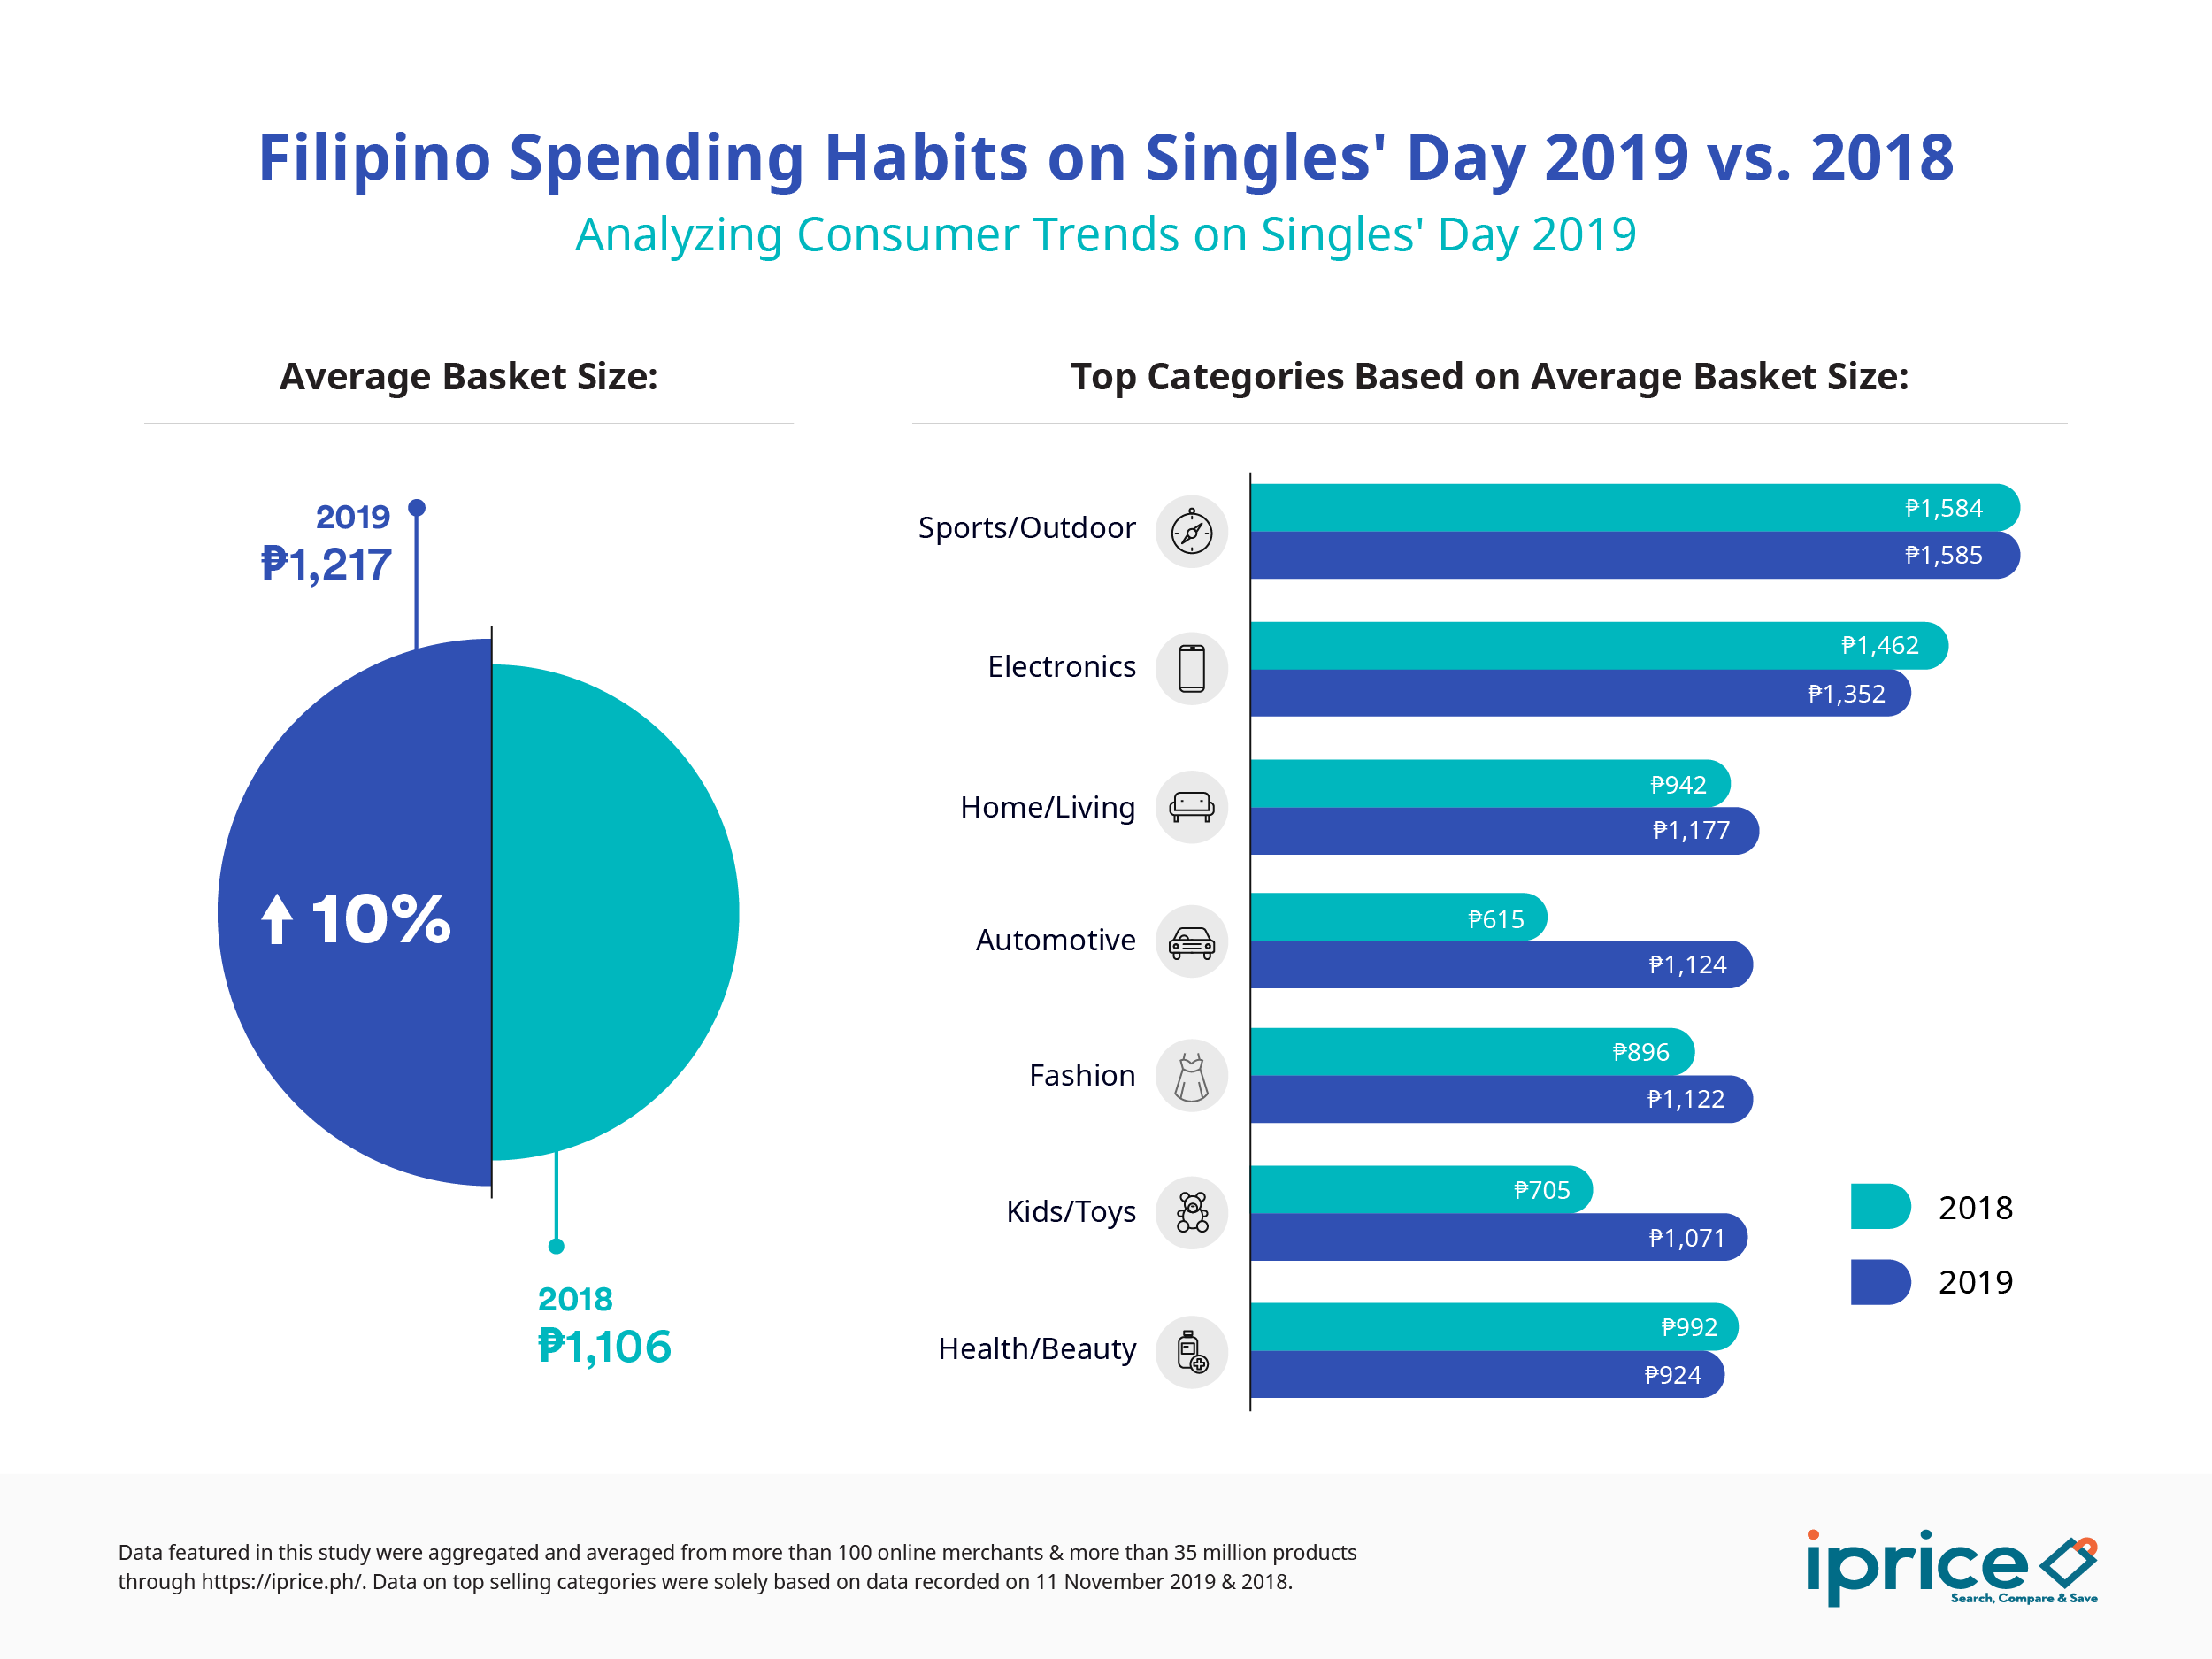 Sales days reveal the Philippines' growing appetite for